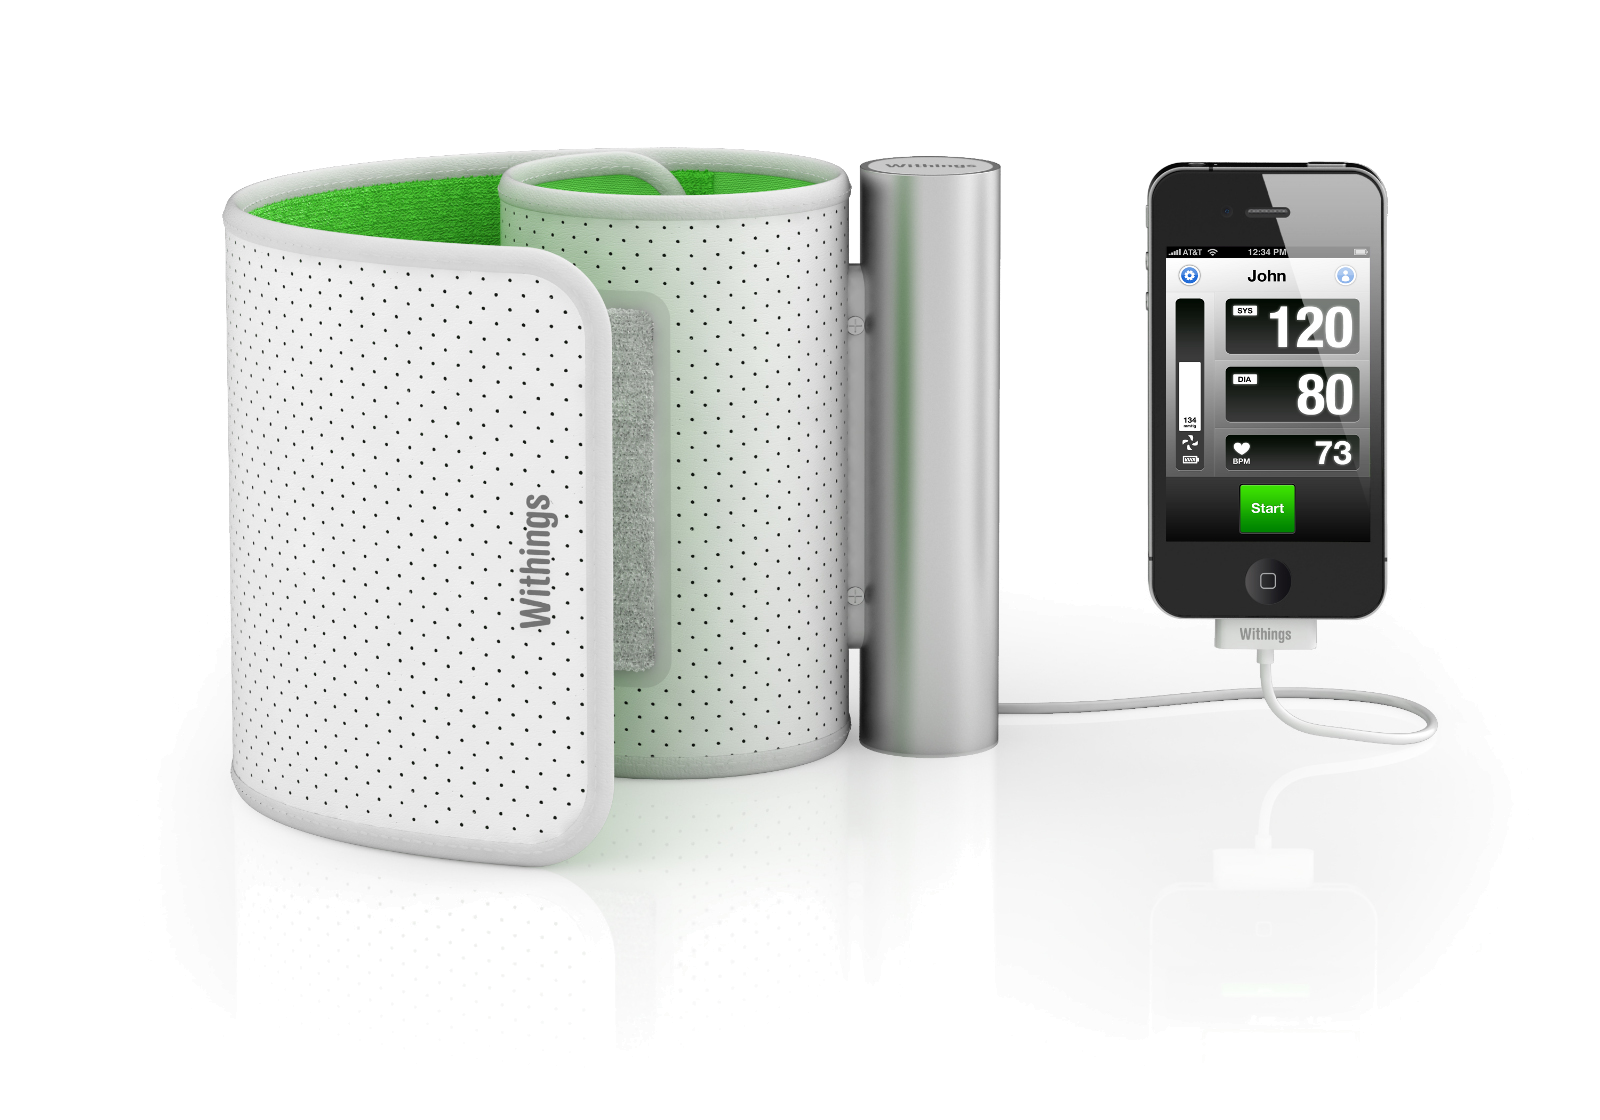 Biceps-On: Withings Blood Pressure Monitor for iPhone, iPad